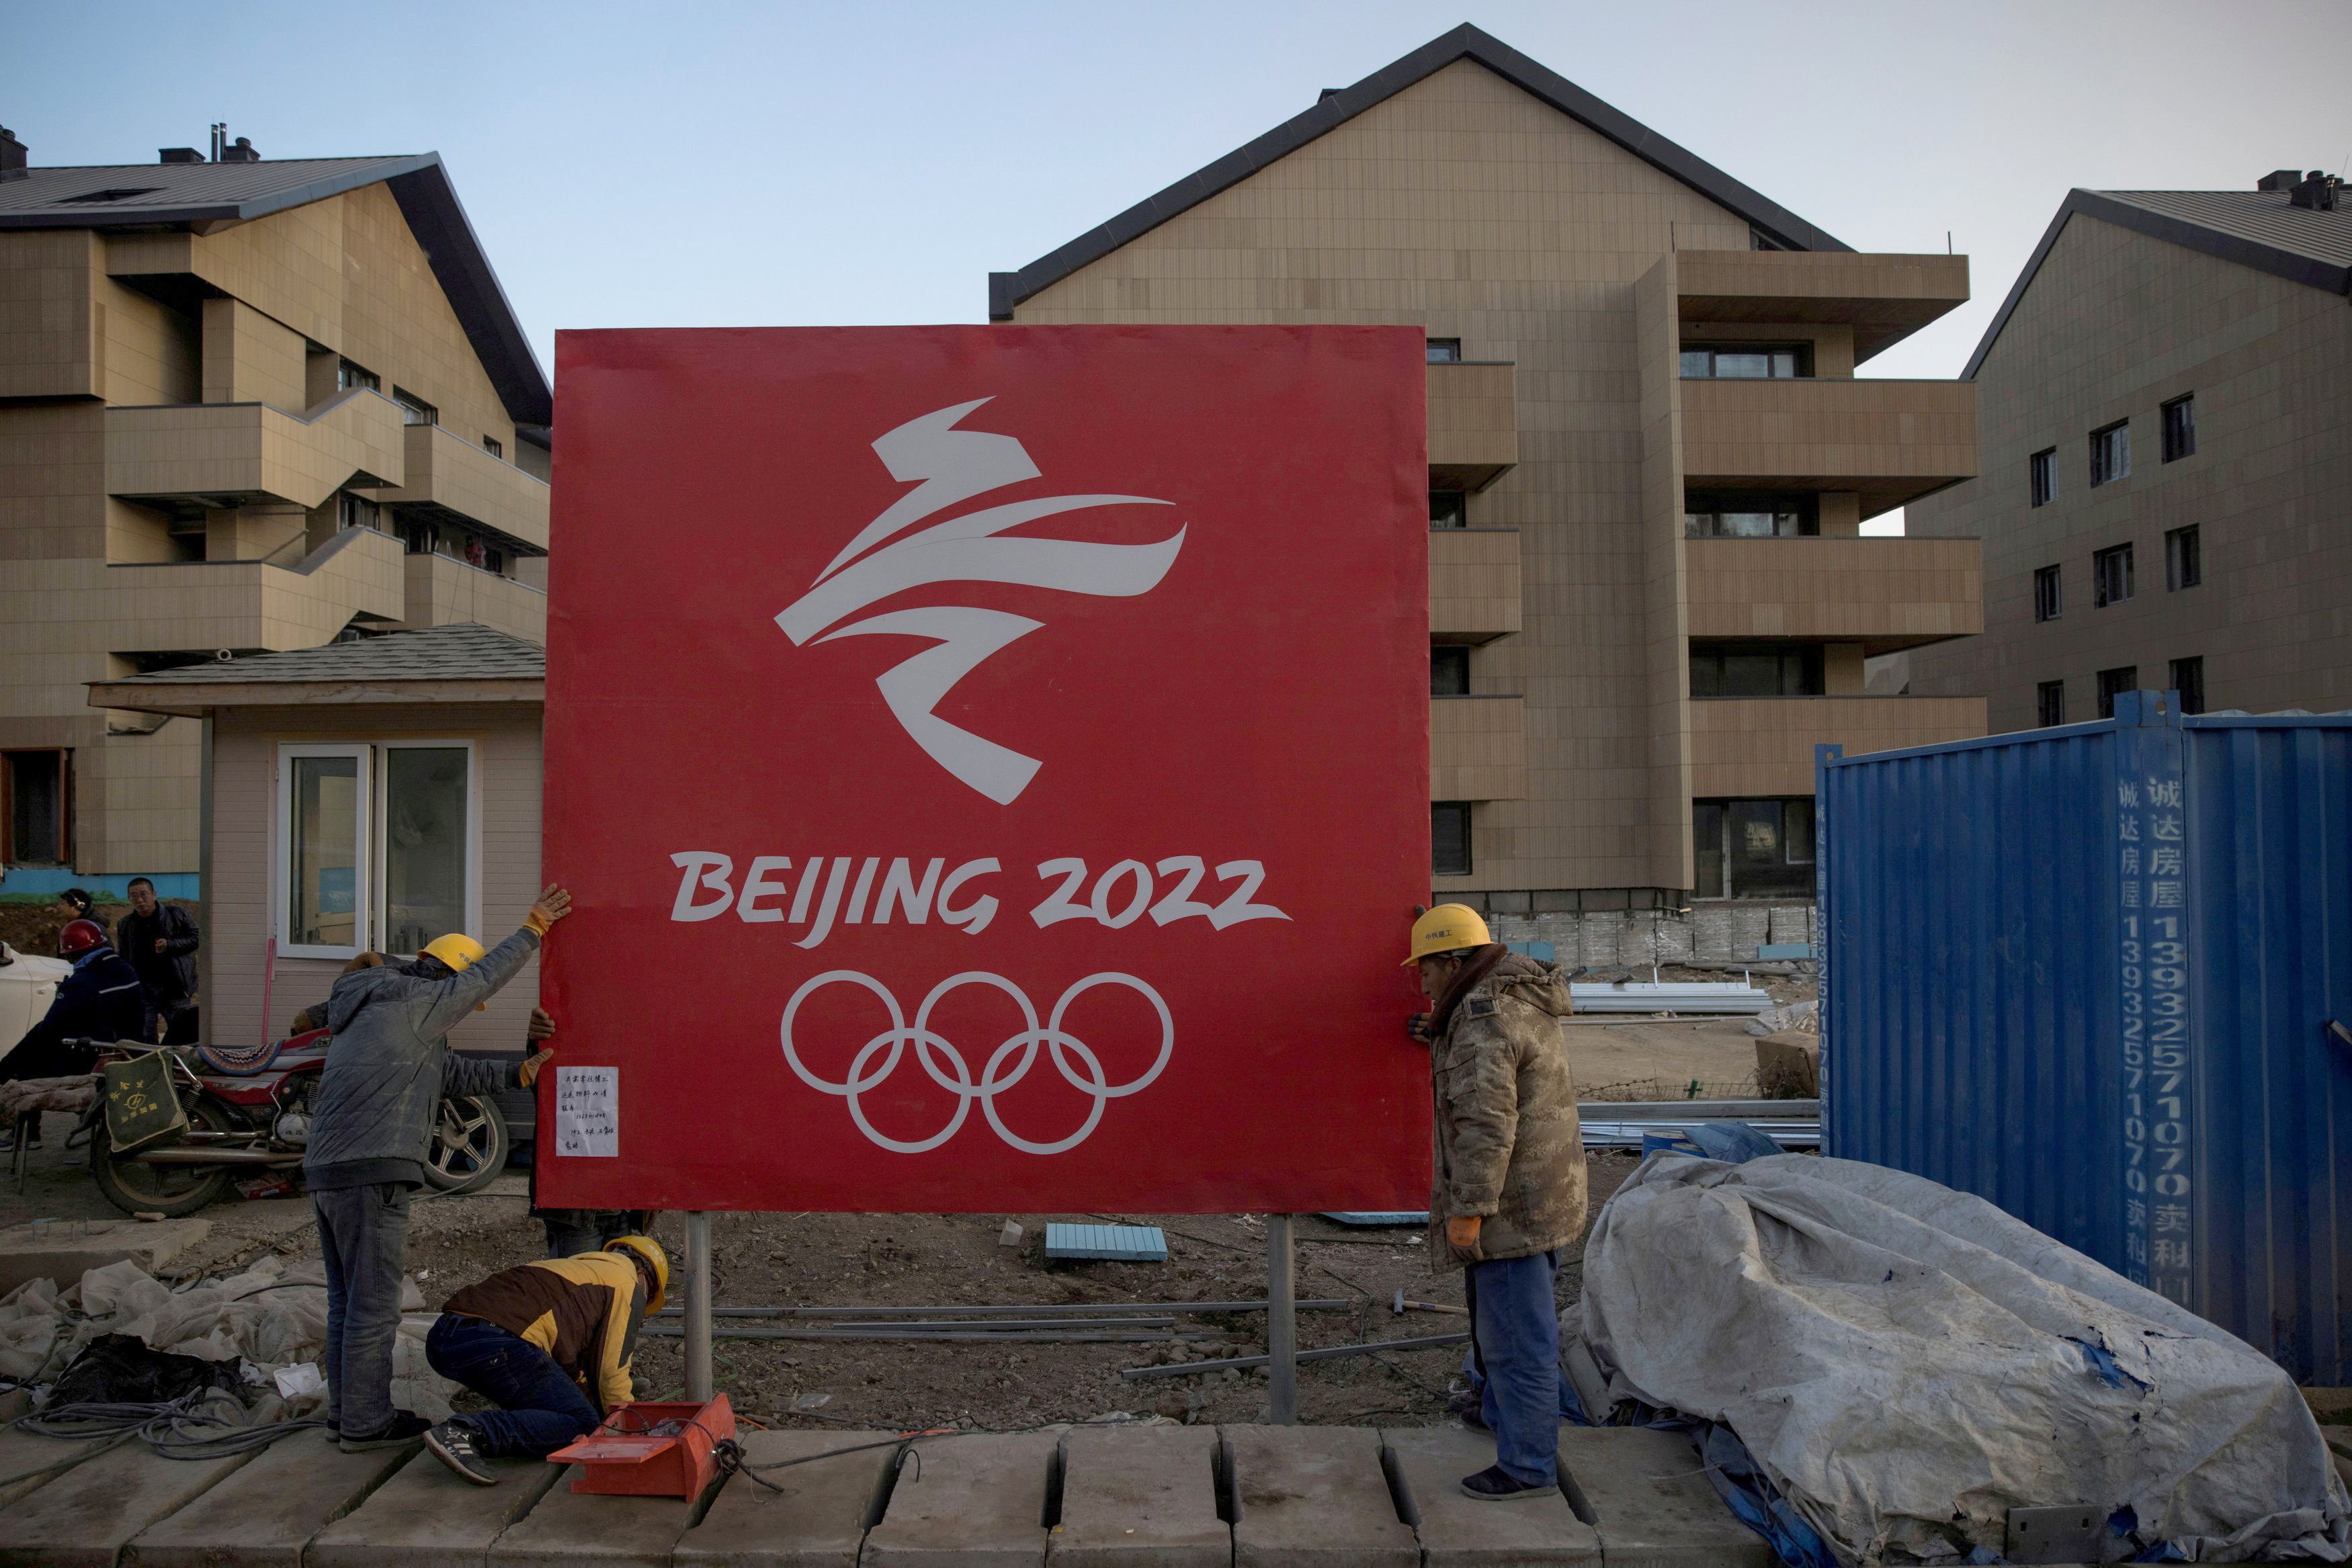 Workers move a sign Oct. 29, 2020, at the Thaiwoo ski resort near skiing venues of the 2022 Winter Olympics in Chongli, a popular ski resort town in China. (CNS photo/Thomas Peter, Reuters)